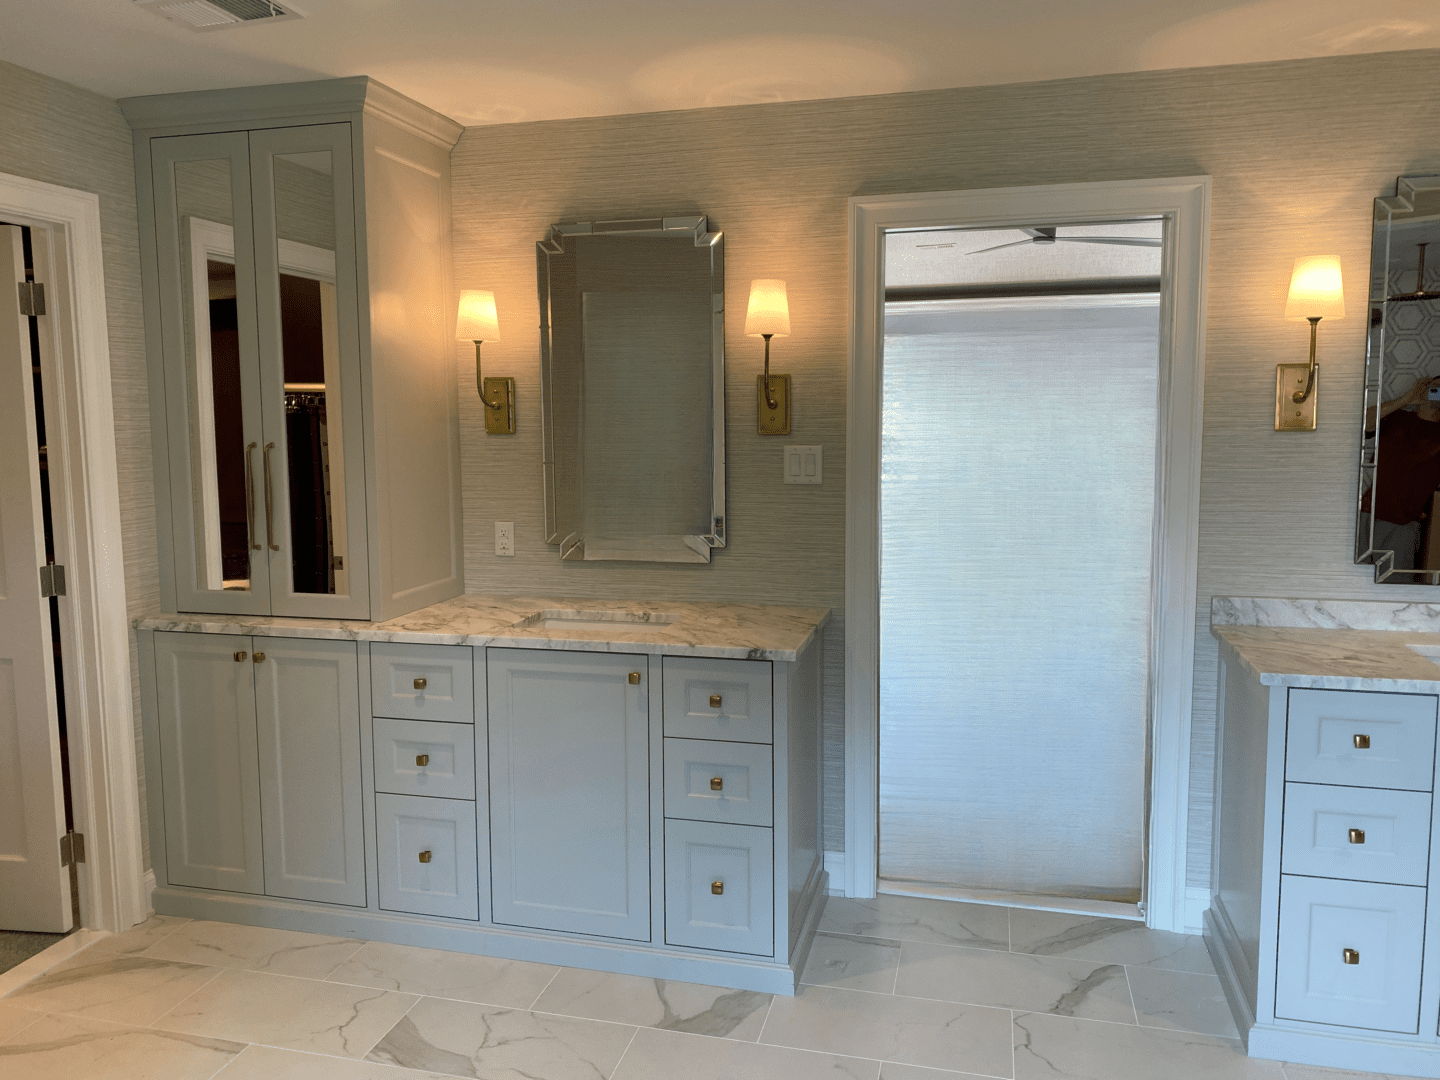 A Bathroom Space With Marble Flooring